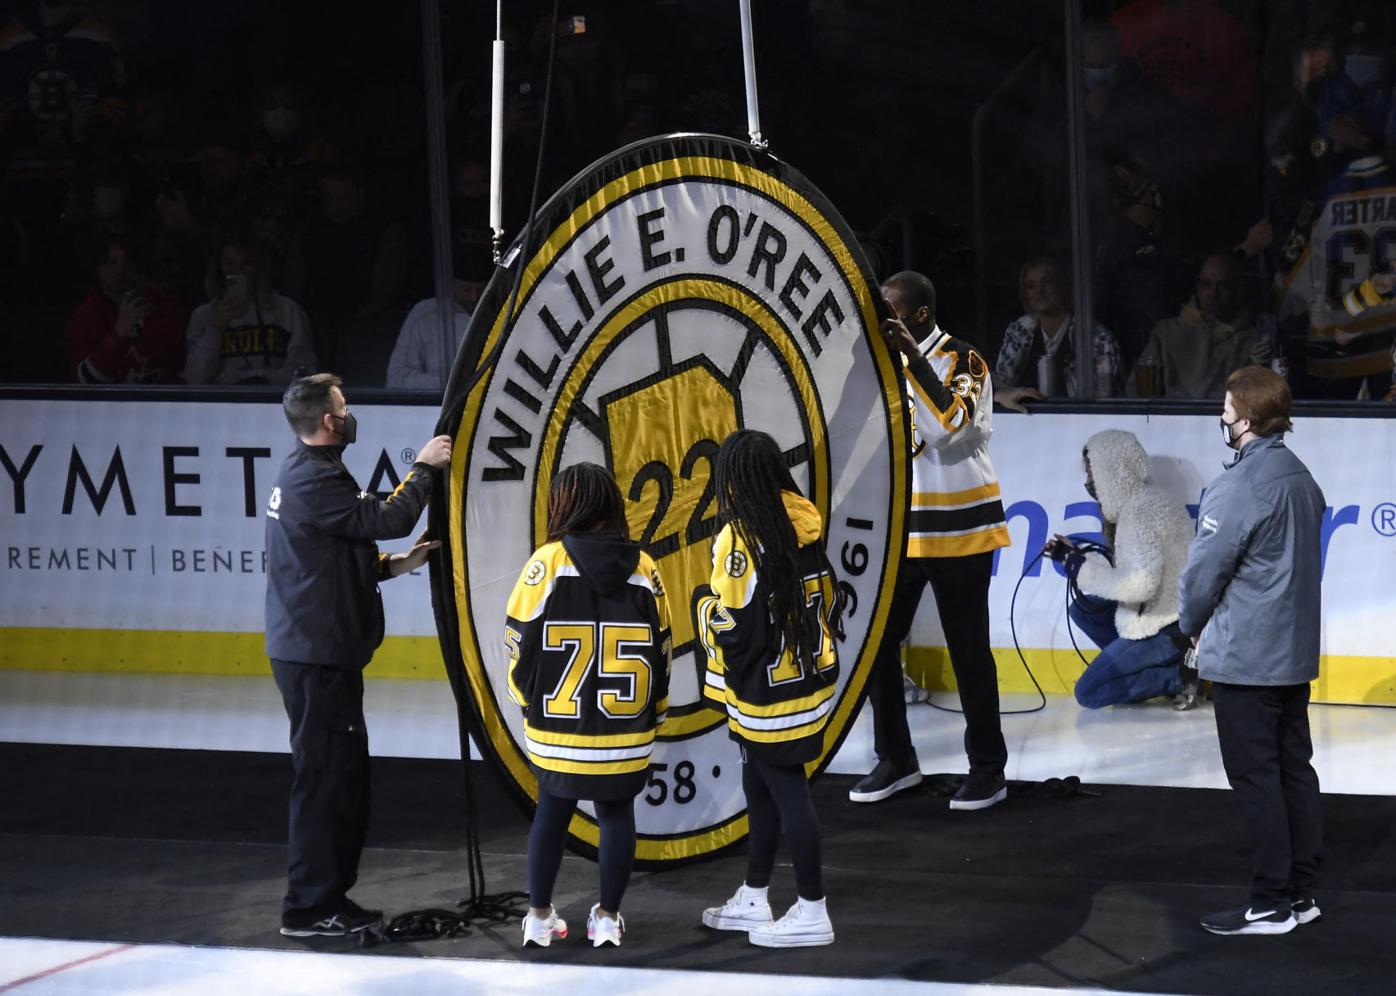 After breaking color barrier in hockey, Willie O'Ree's number to be retired